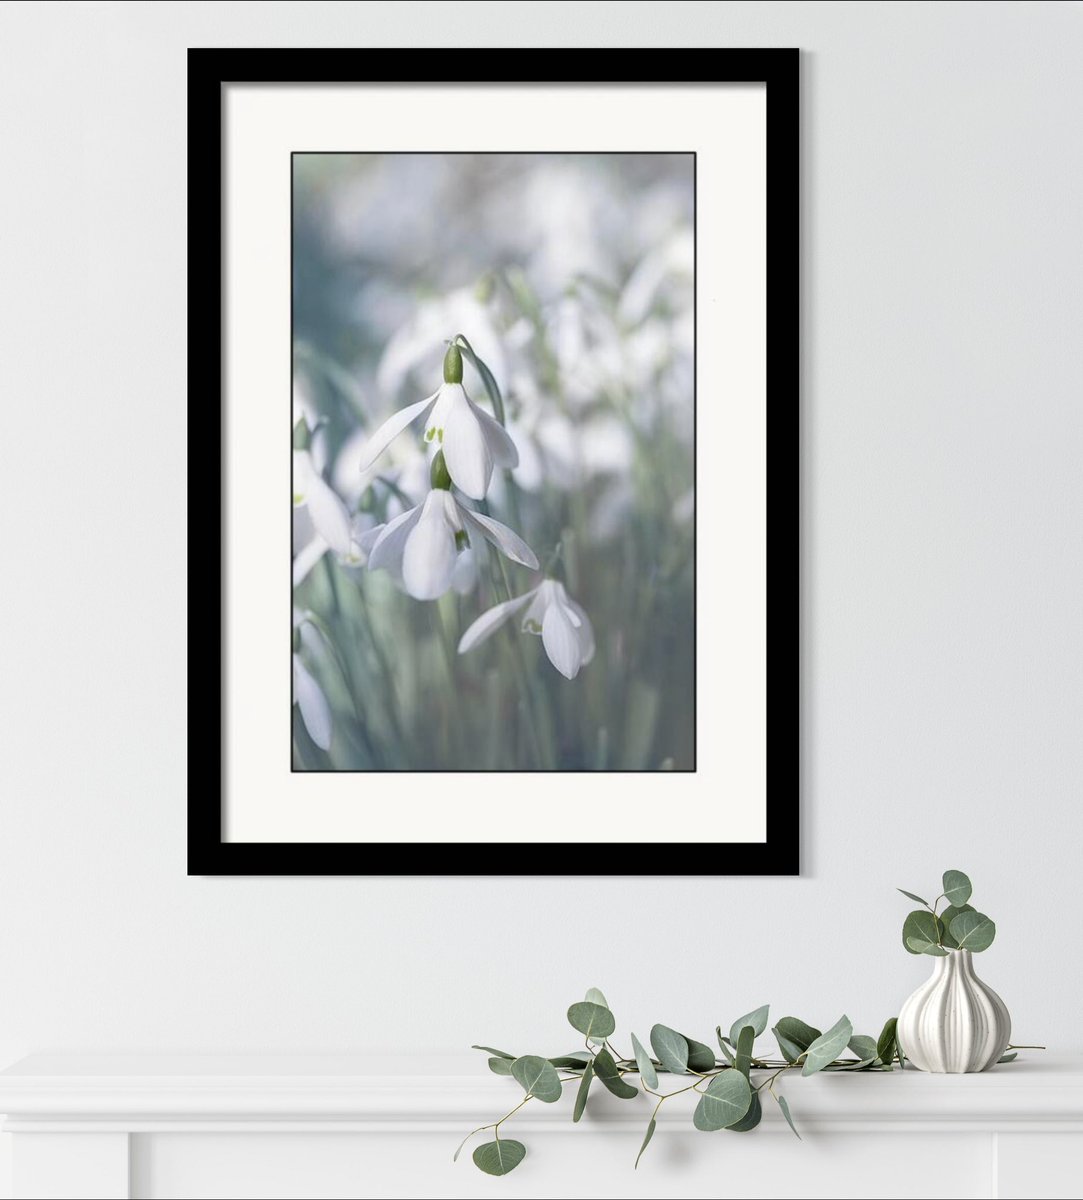 Snowdrop Flowers #wallart and more.. HERE: 5-tanya-smith.pixels.com/featured/snowd… #flowers #PhotographyIsArt #snowdrops #ethereal #dreamy #BuyIntoArt #FillThatEmptyWall #giftidea #homedecor #interiordecor